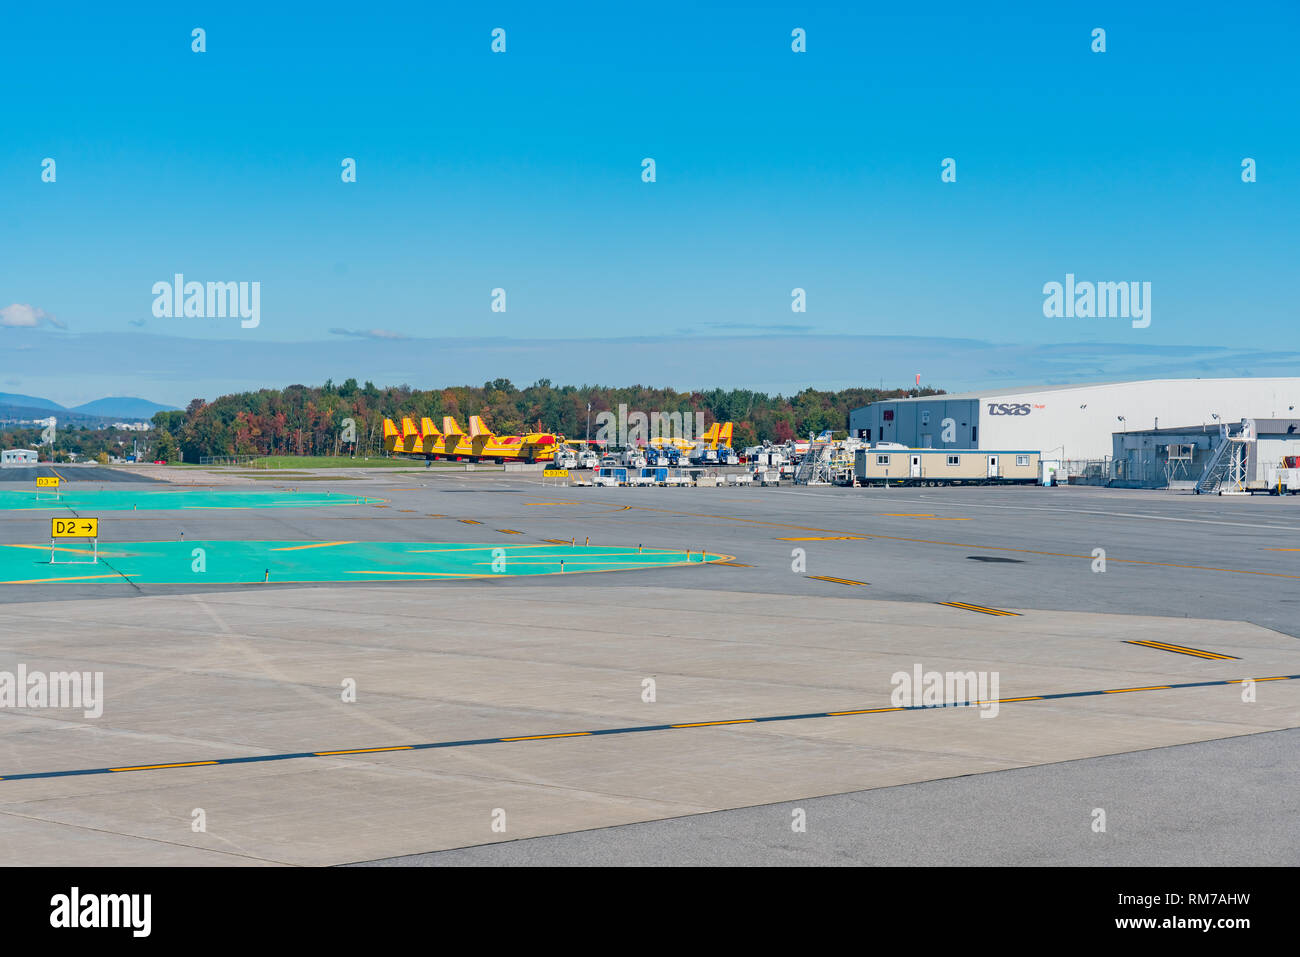 Quebec, OCT 2: Exterior view of the Quebec Airport on OCT 2, 2018 at Quebec, Canada Stock Photo